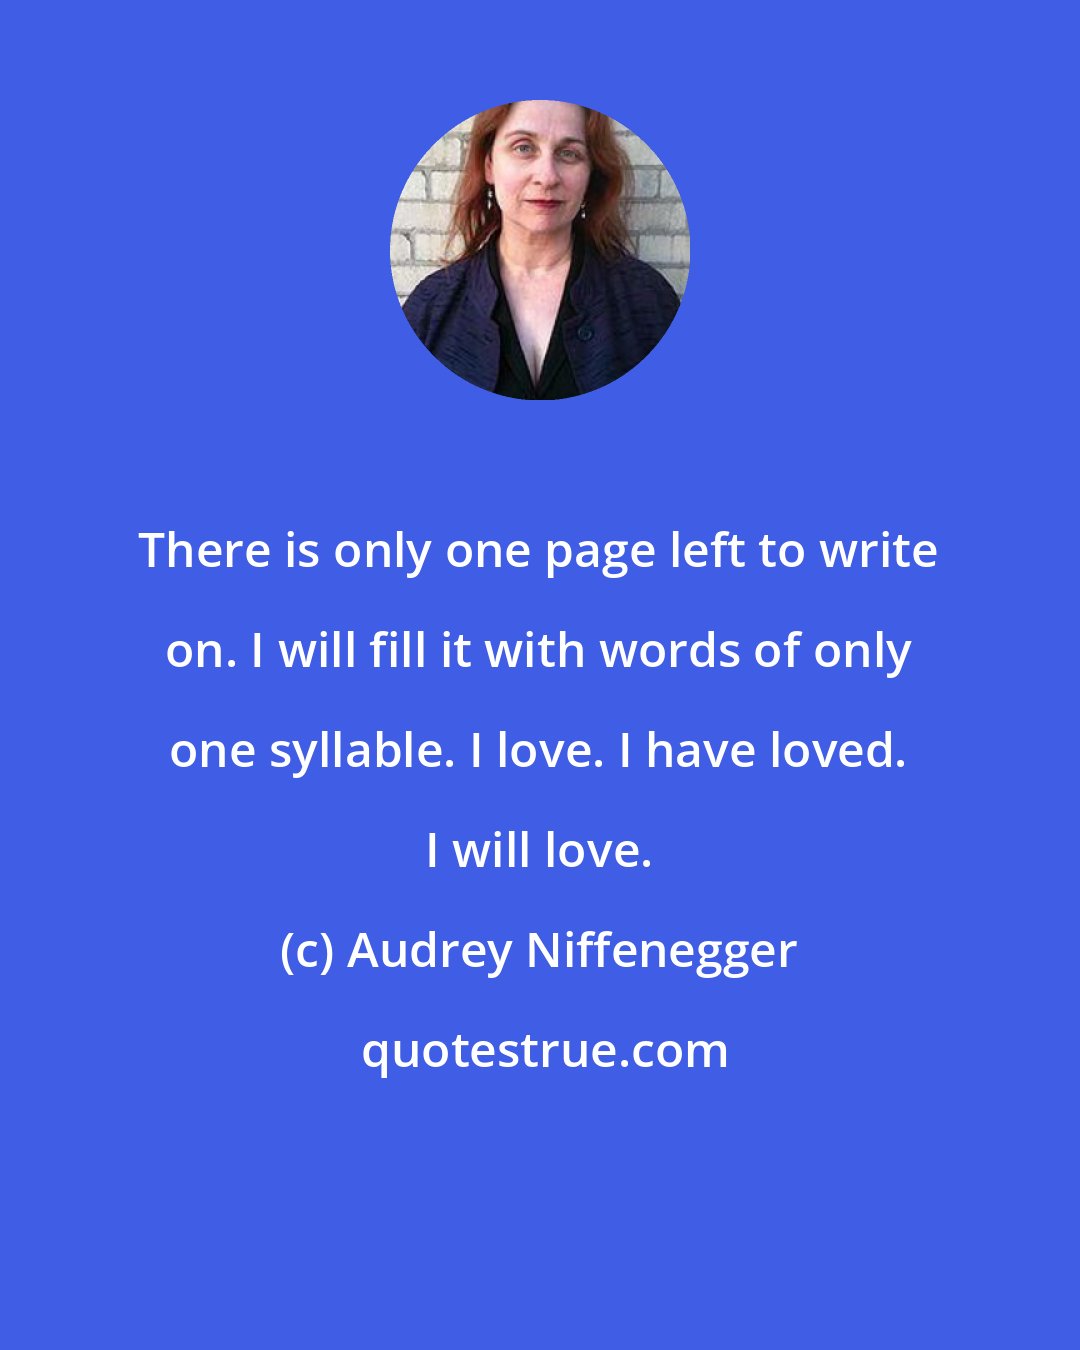 Audrey Niffenegger: There is only one page left to write on. I will fill it with words of only one syllable. I love. I have loved. I will love.